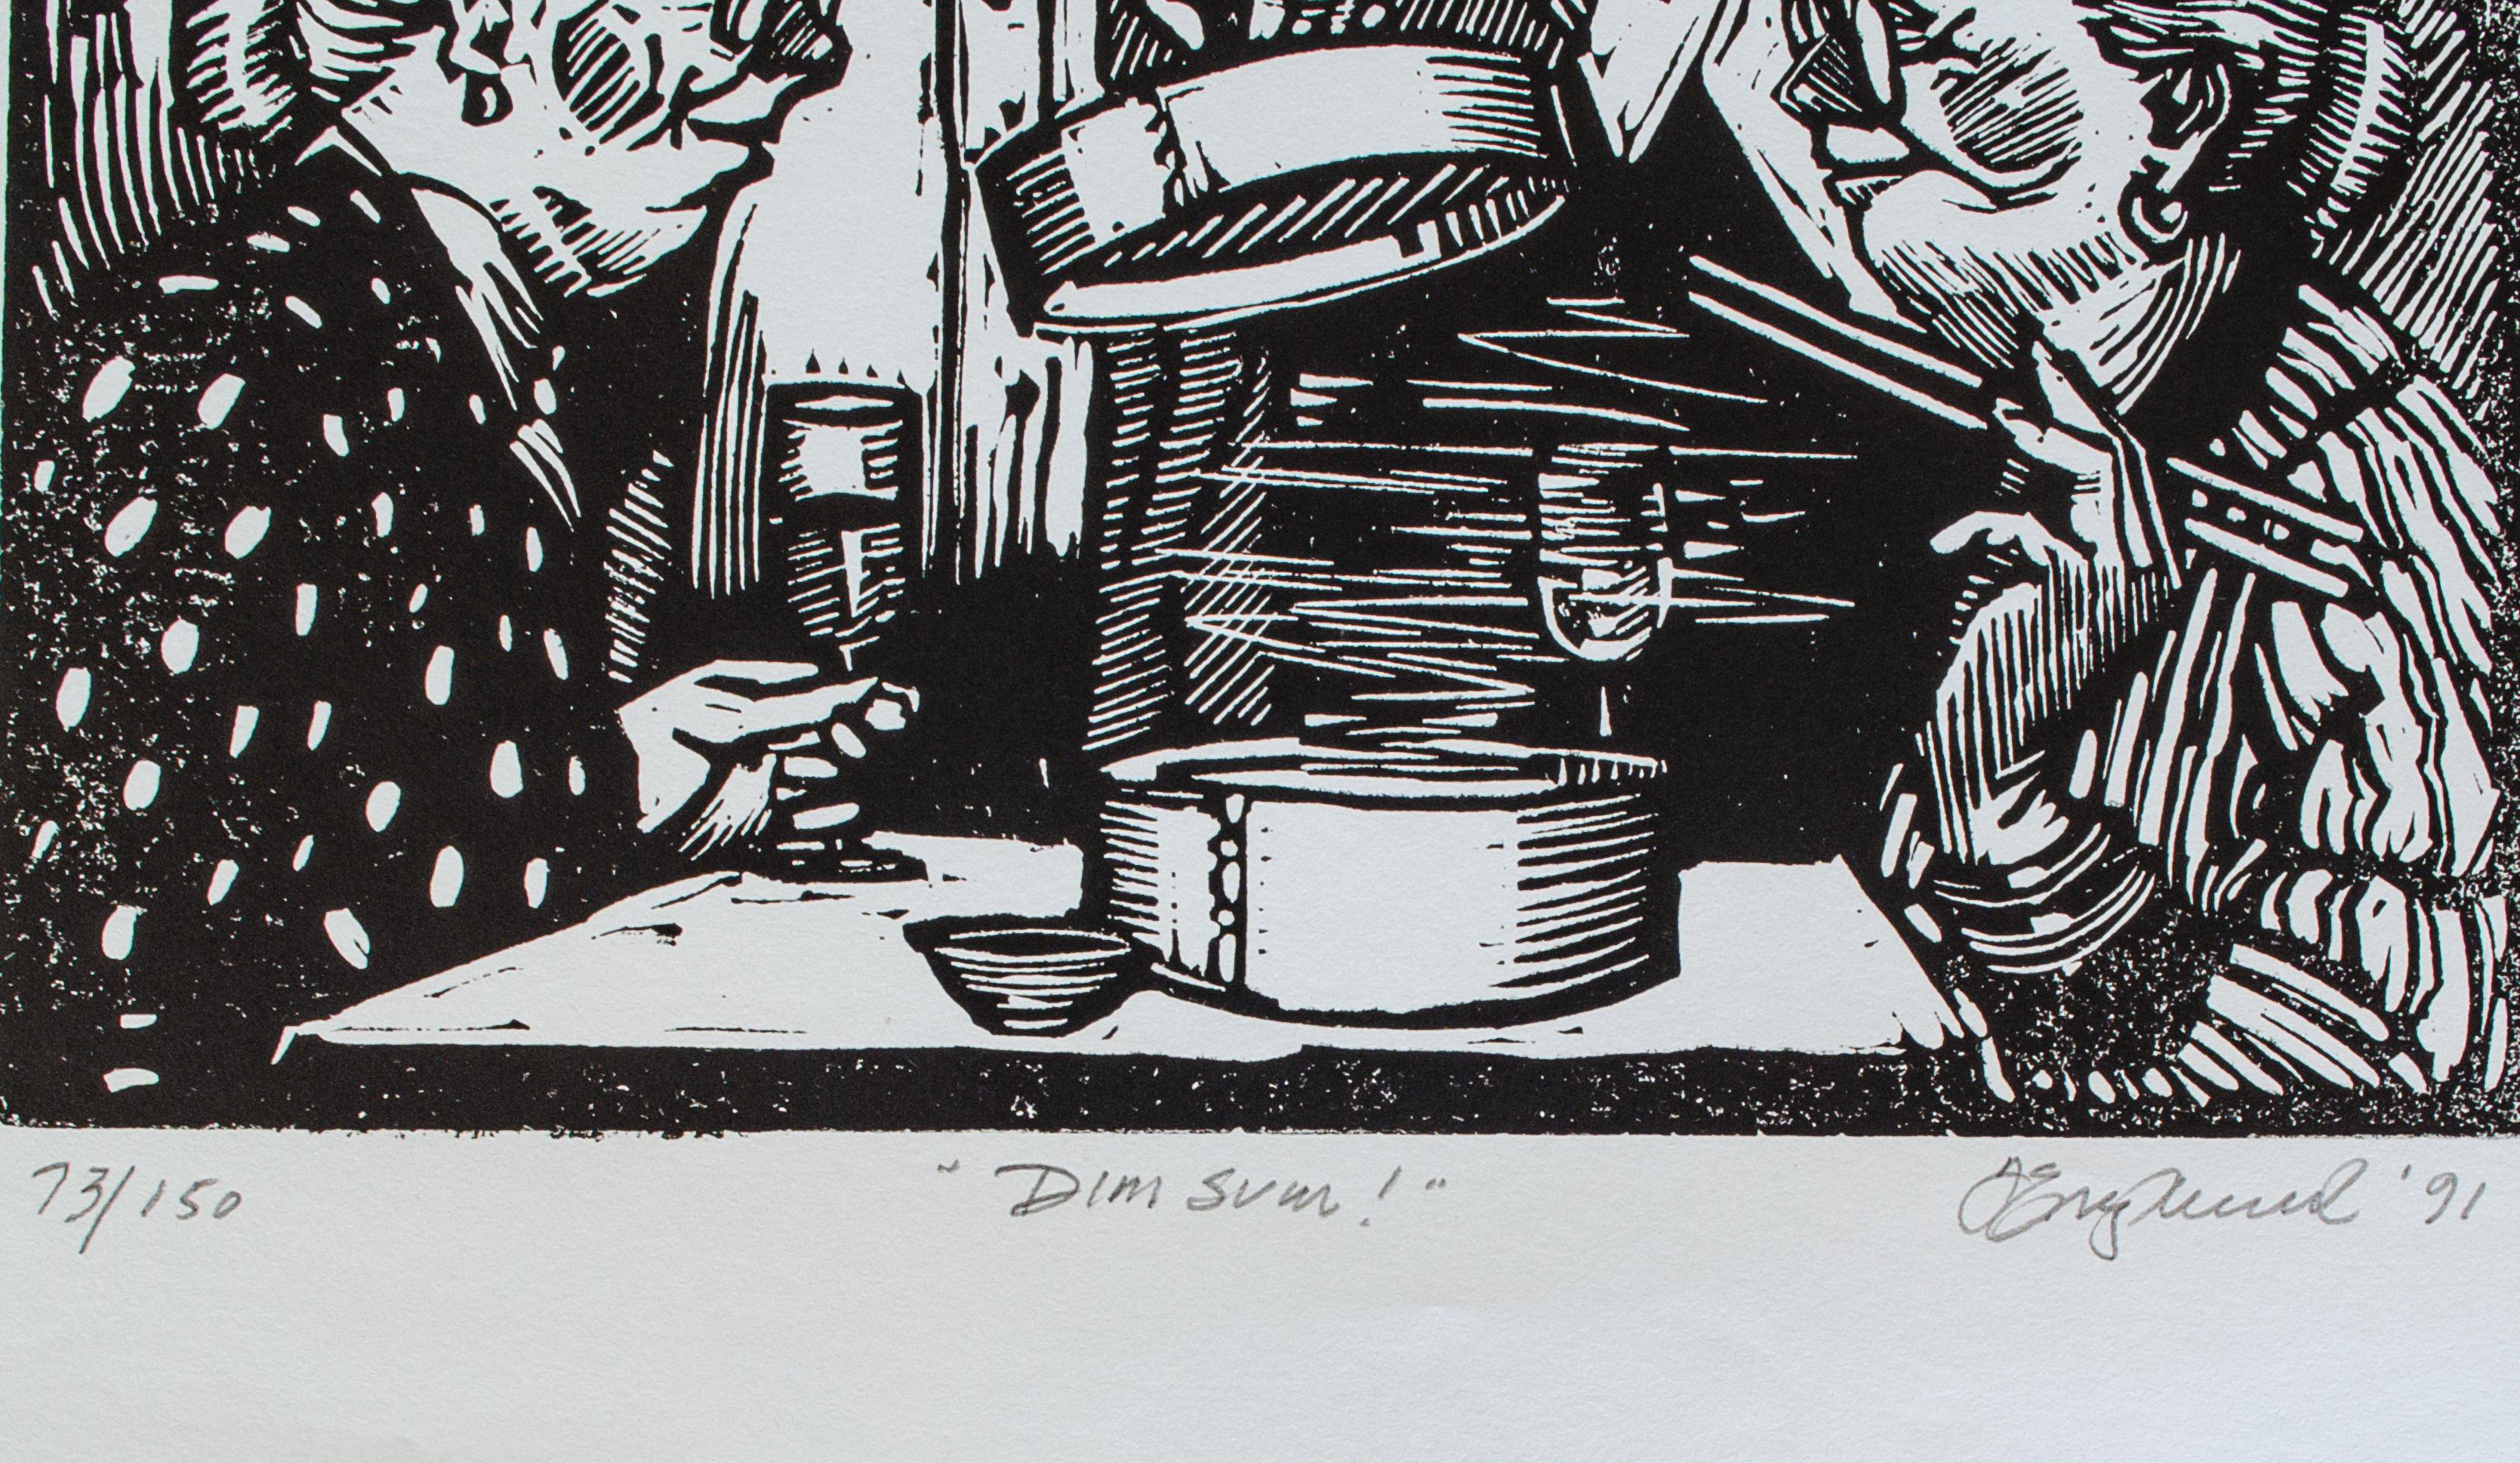 Tim Engelland (American, 1950-2012)
Dim Sum!, 1991
Woodcut 
8 1/2 x 11 in.
Signed dated lower right: T. Engelland, '91
Titled lower middle: Dim Sum!
Numbered lower left: 73/150

A lifelong artist, Engelland specialized in oil portraits and